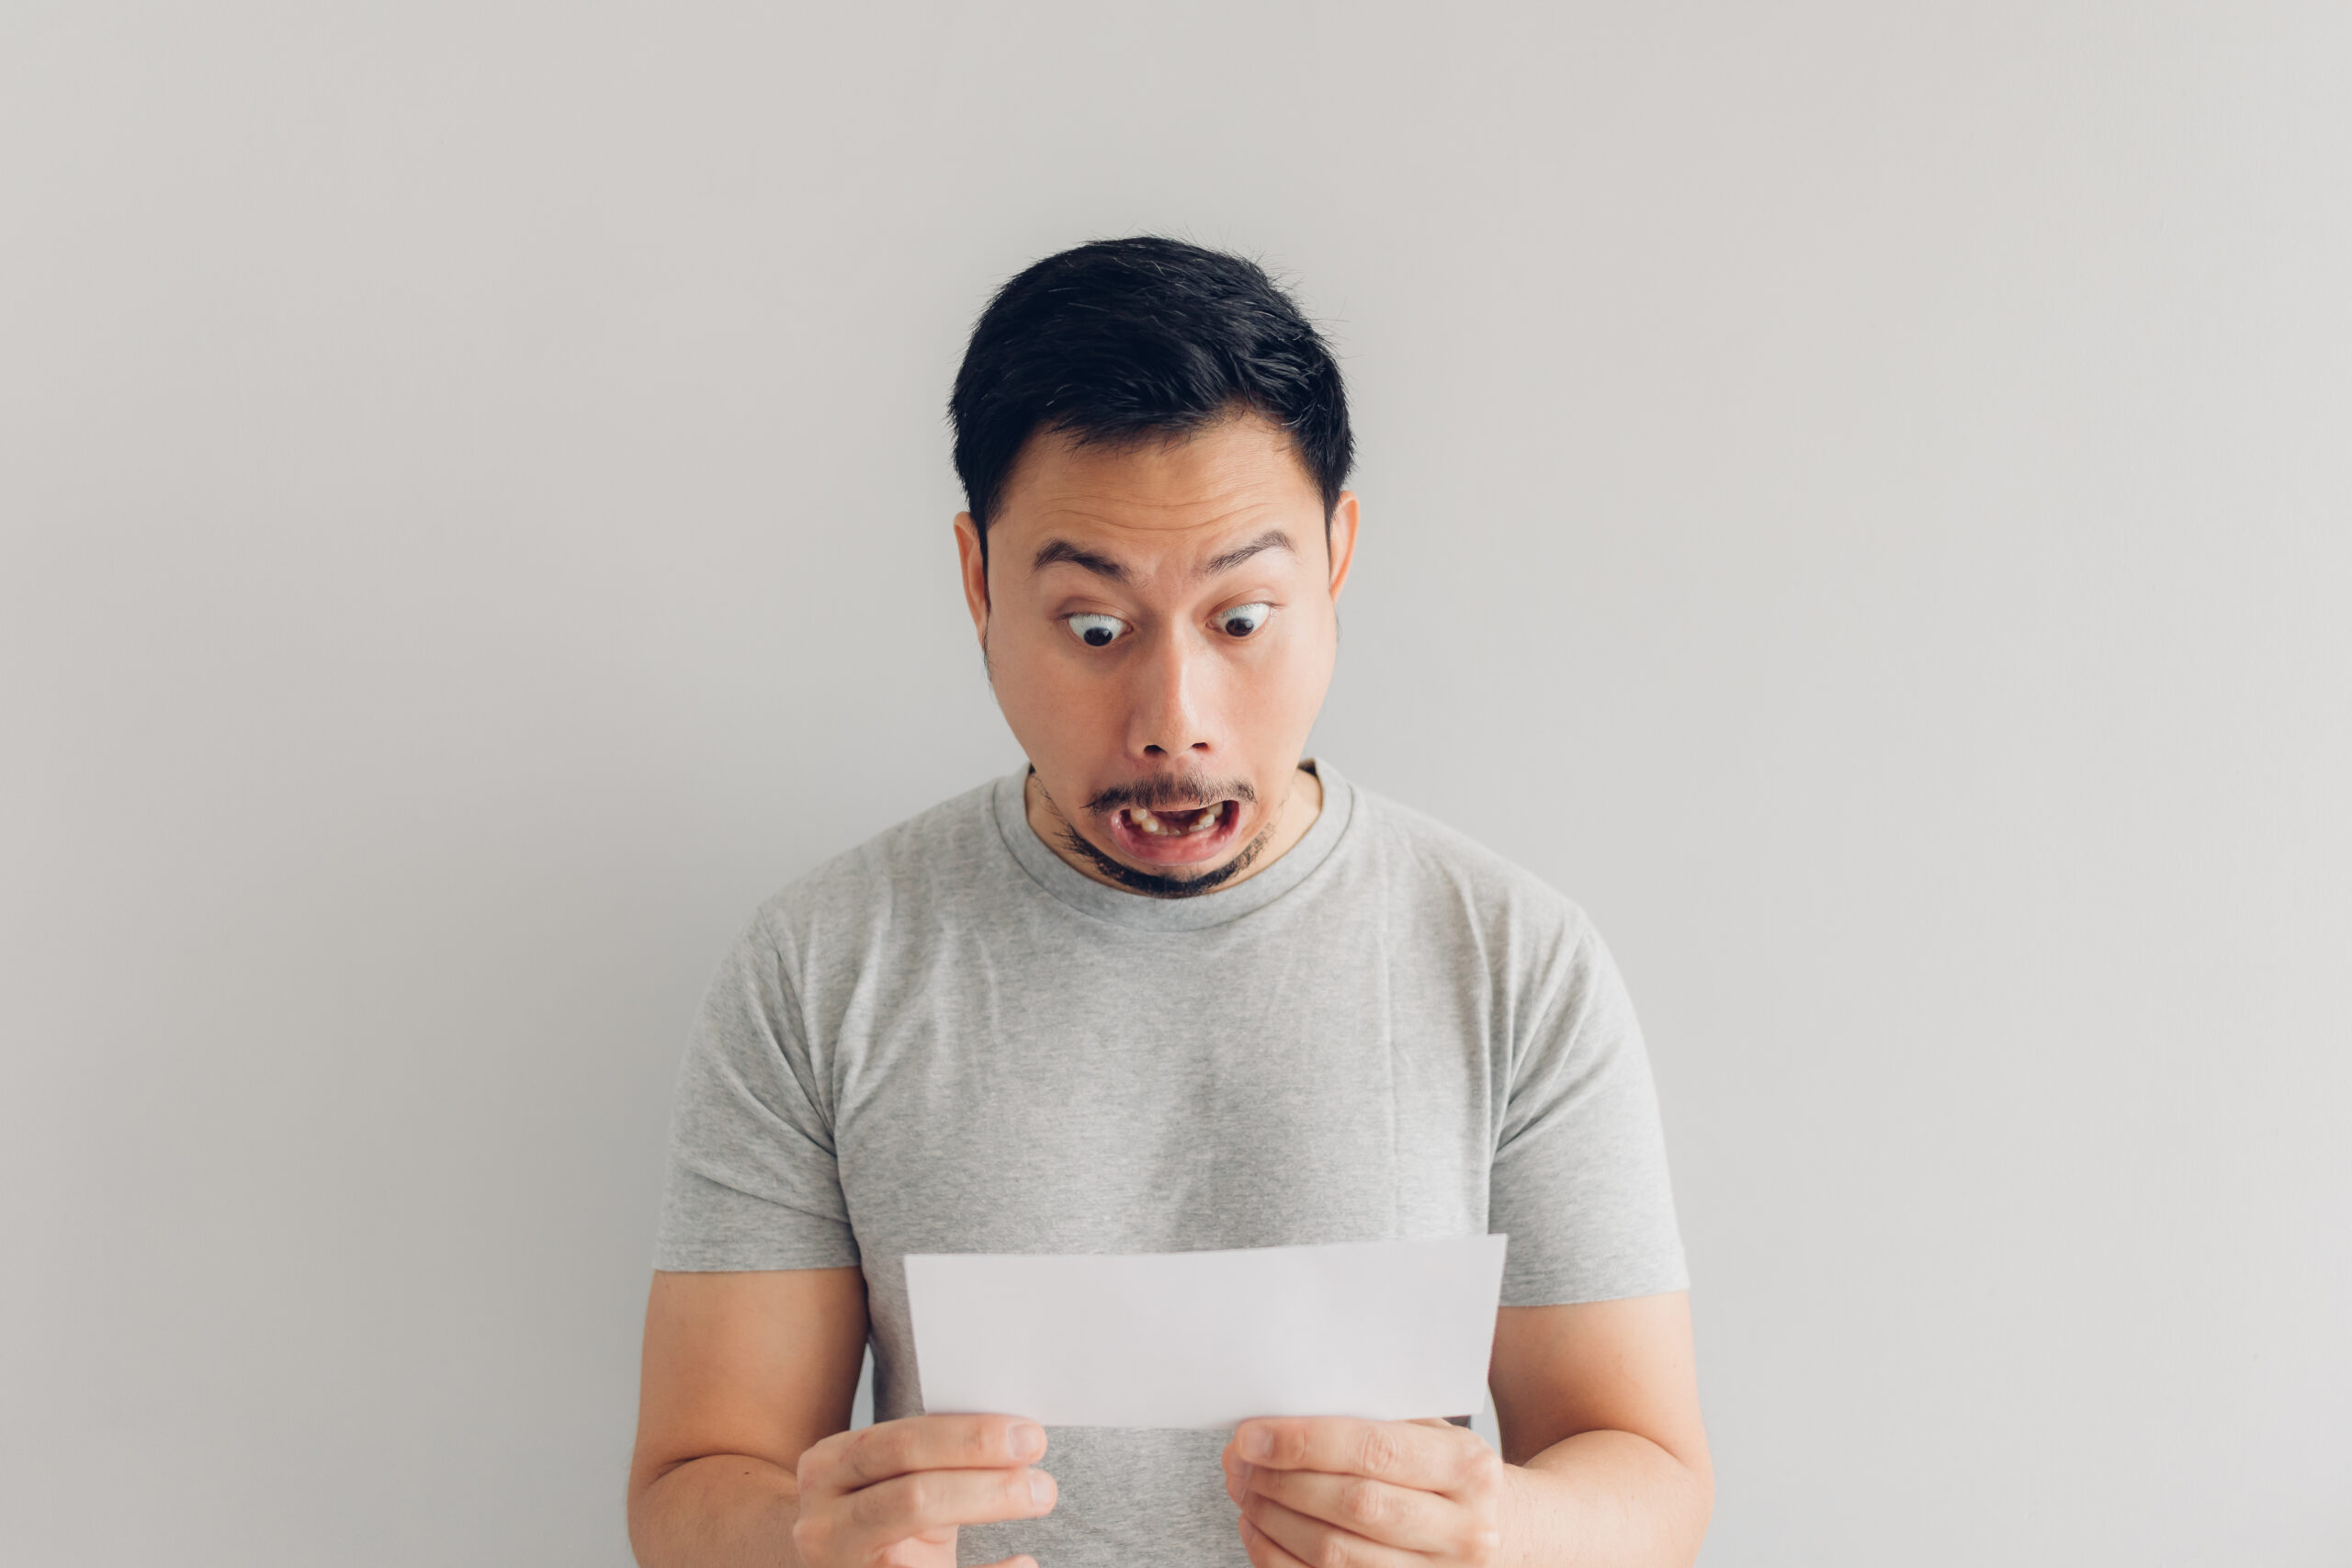 Man is shocked and surprised looking at his high energy bill due to his old roof